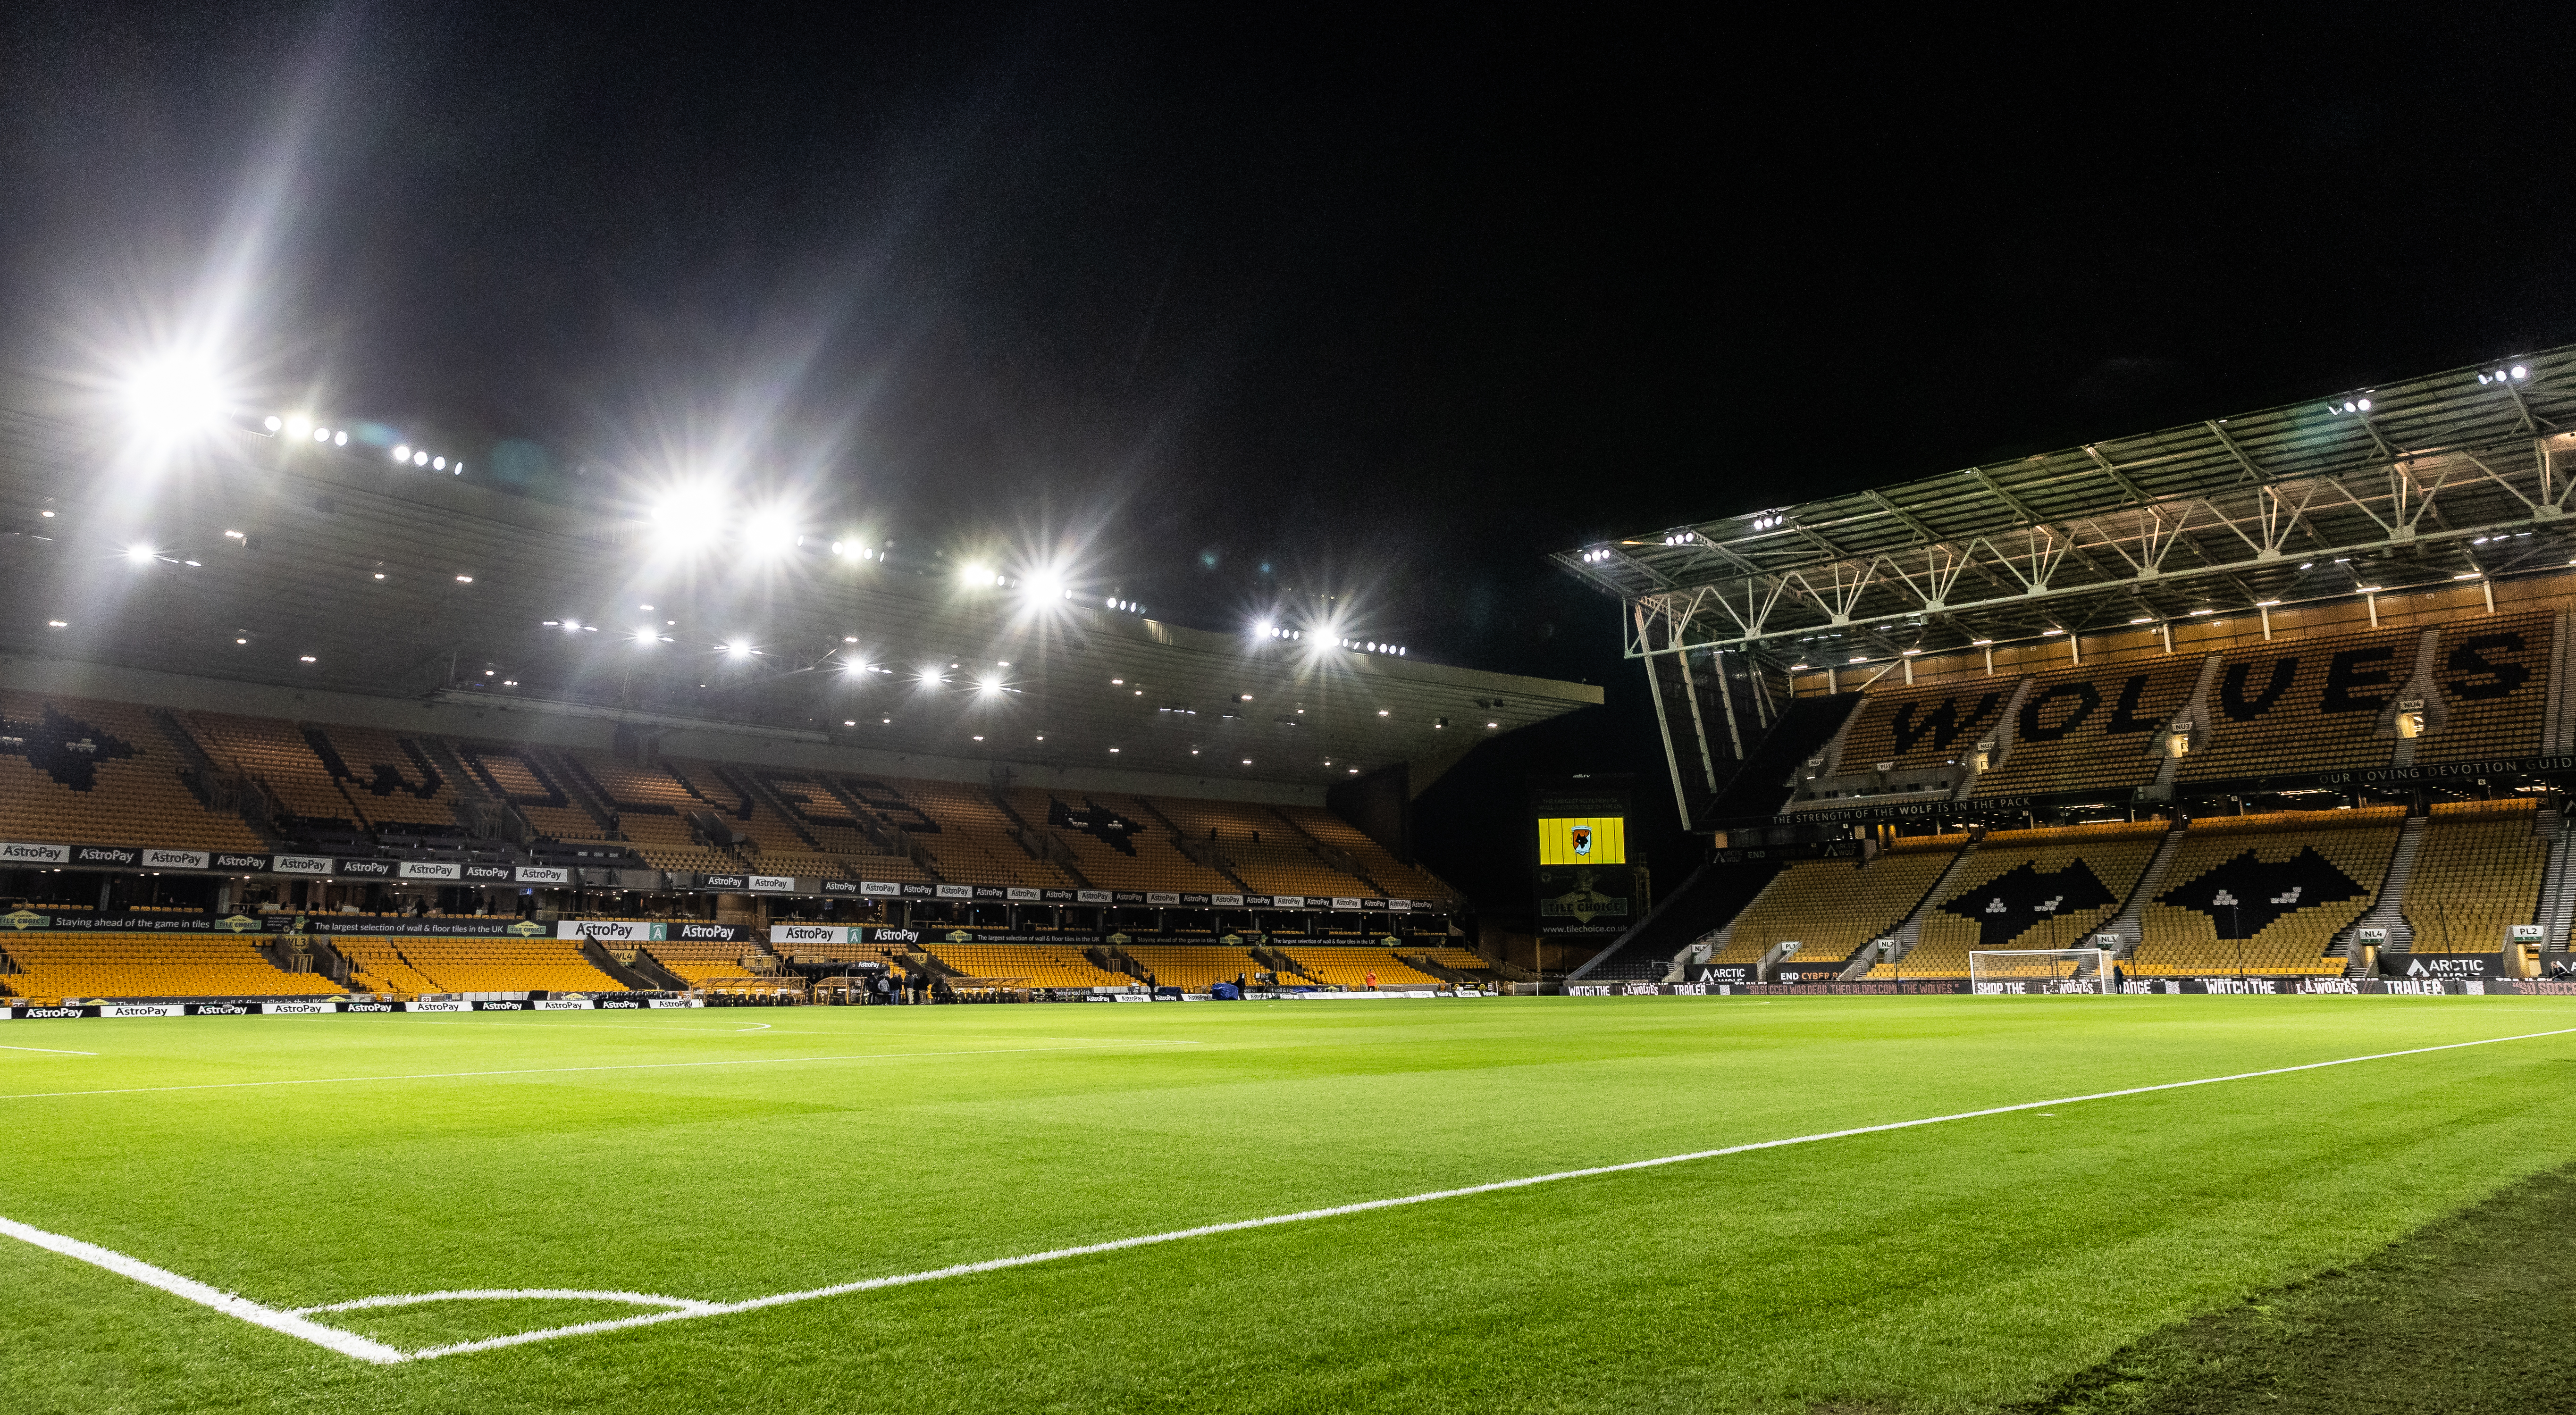 Molineux has led the way before and might do so again in the future